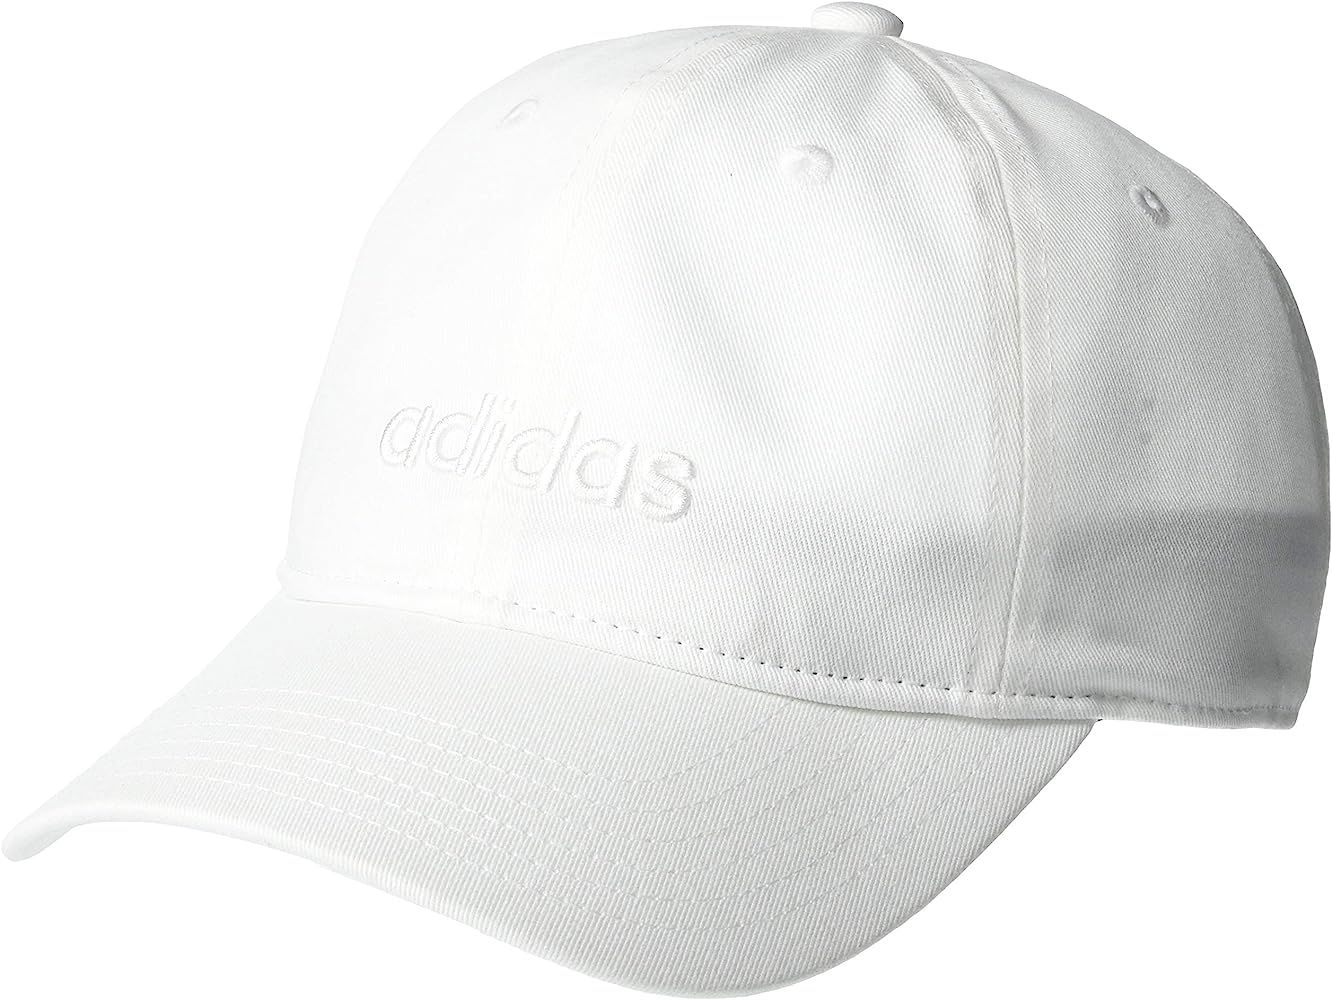 adidas Women's Contender Relaxed Adjustable Cap | Amazon (US)